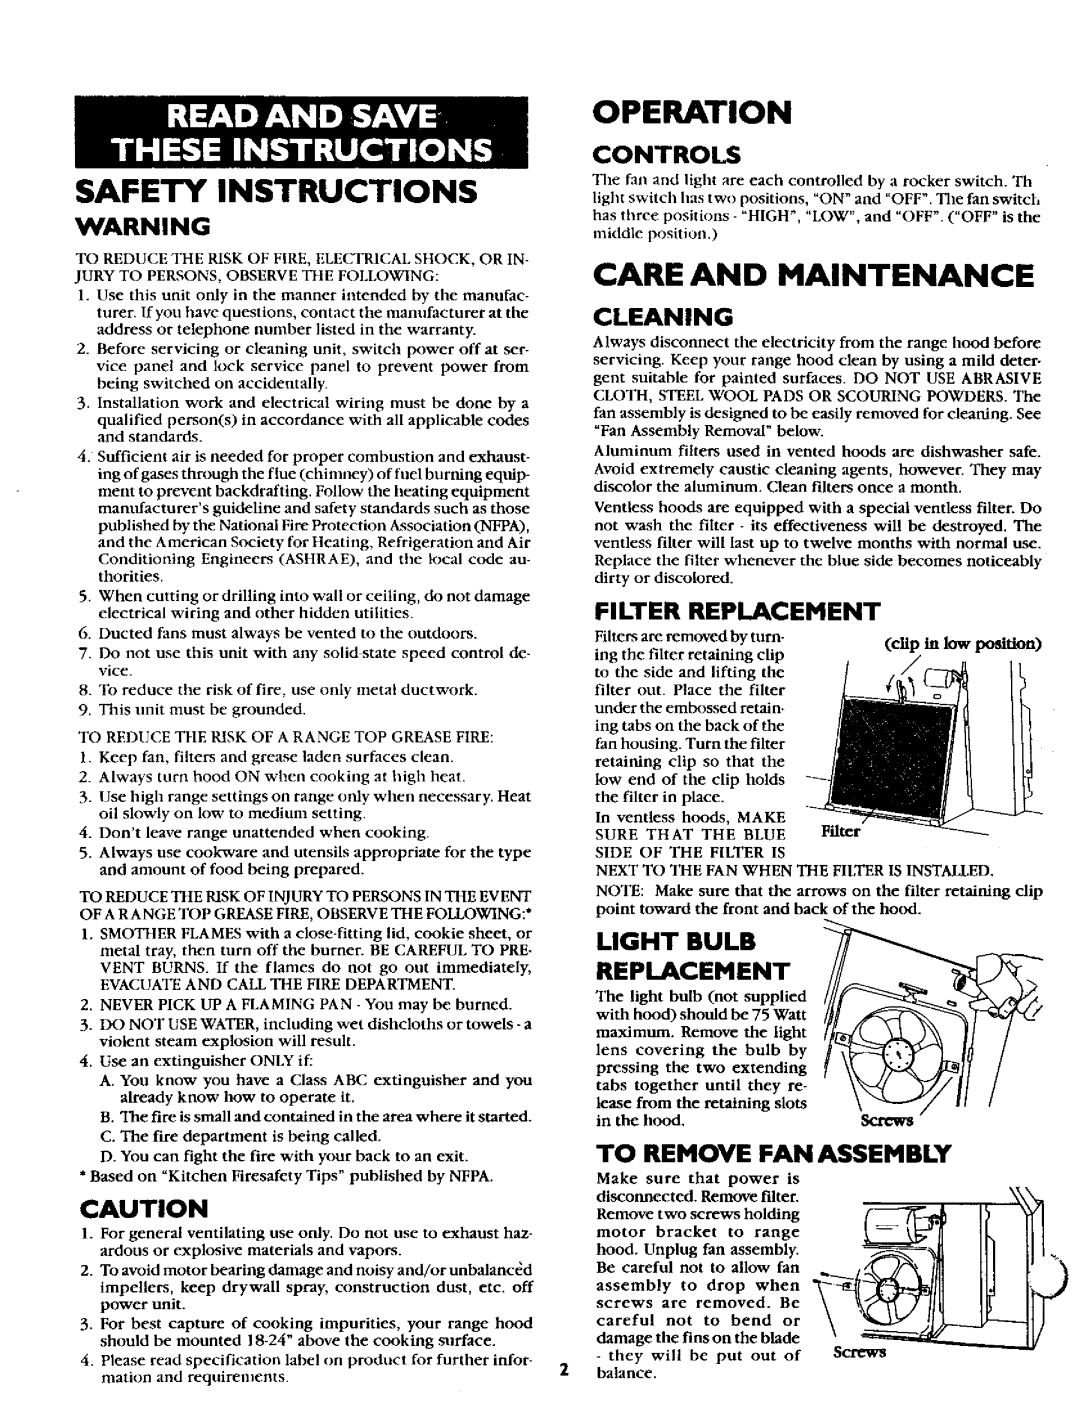 Sears 233.5324559 Safety Instructions, Operation, Filter Replacement, Light Bulb Replacement, Controls, Cleaning, Screws 